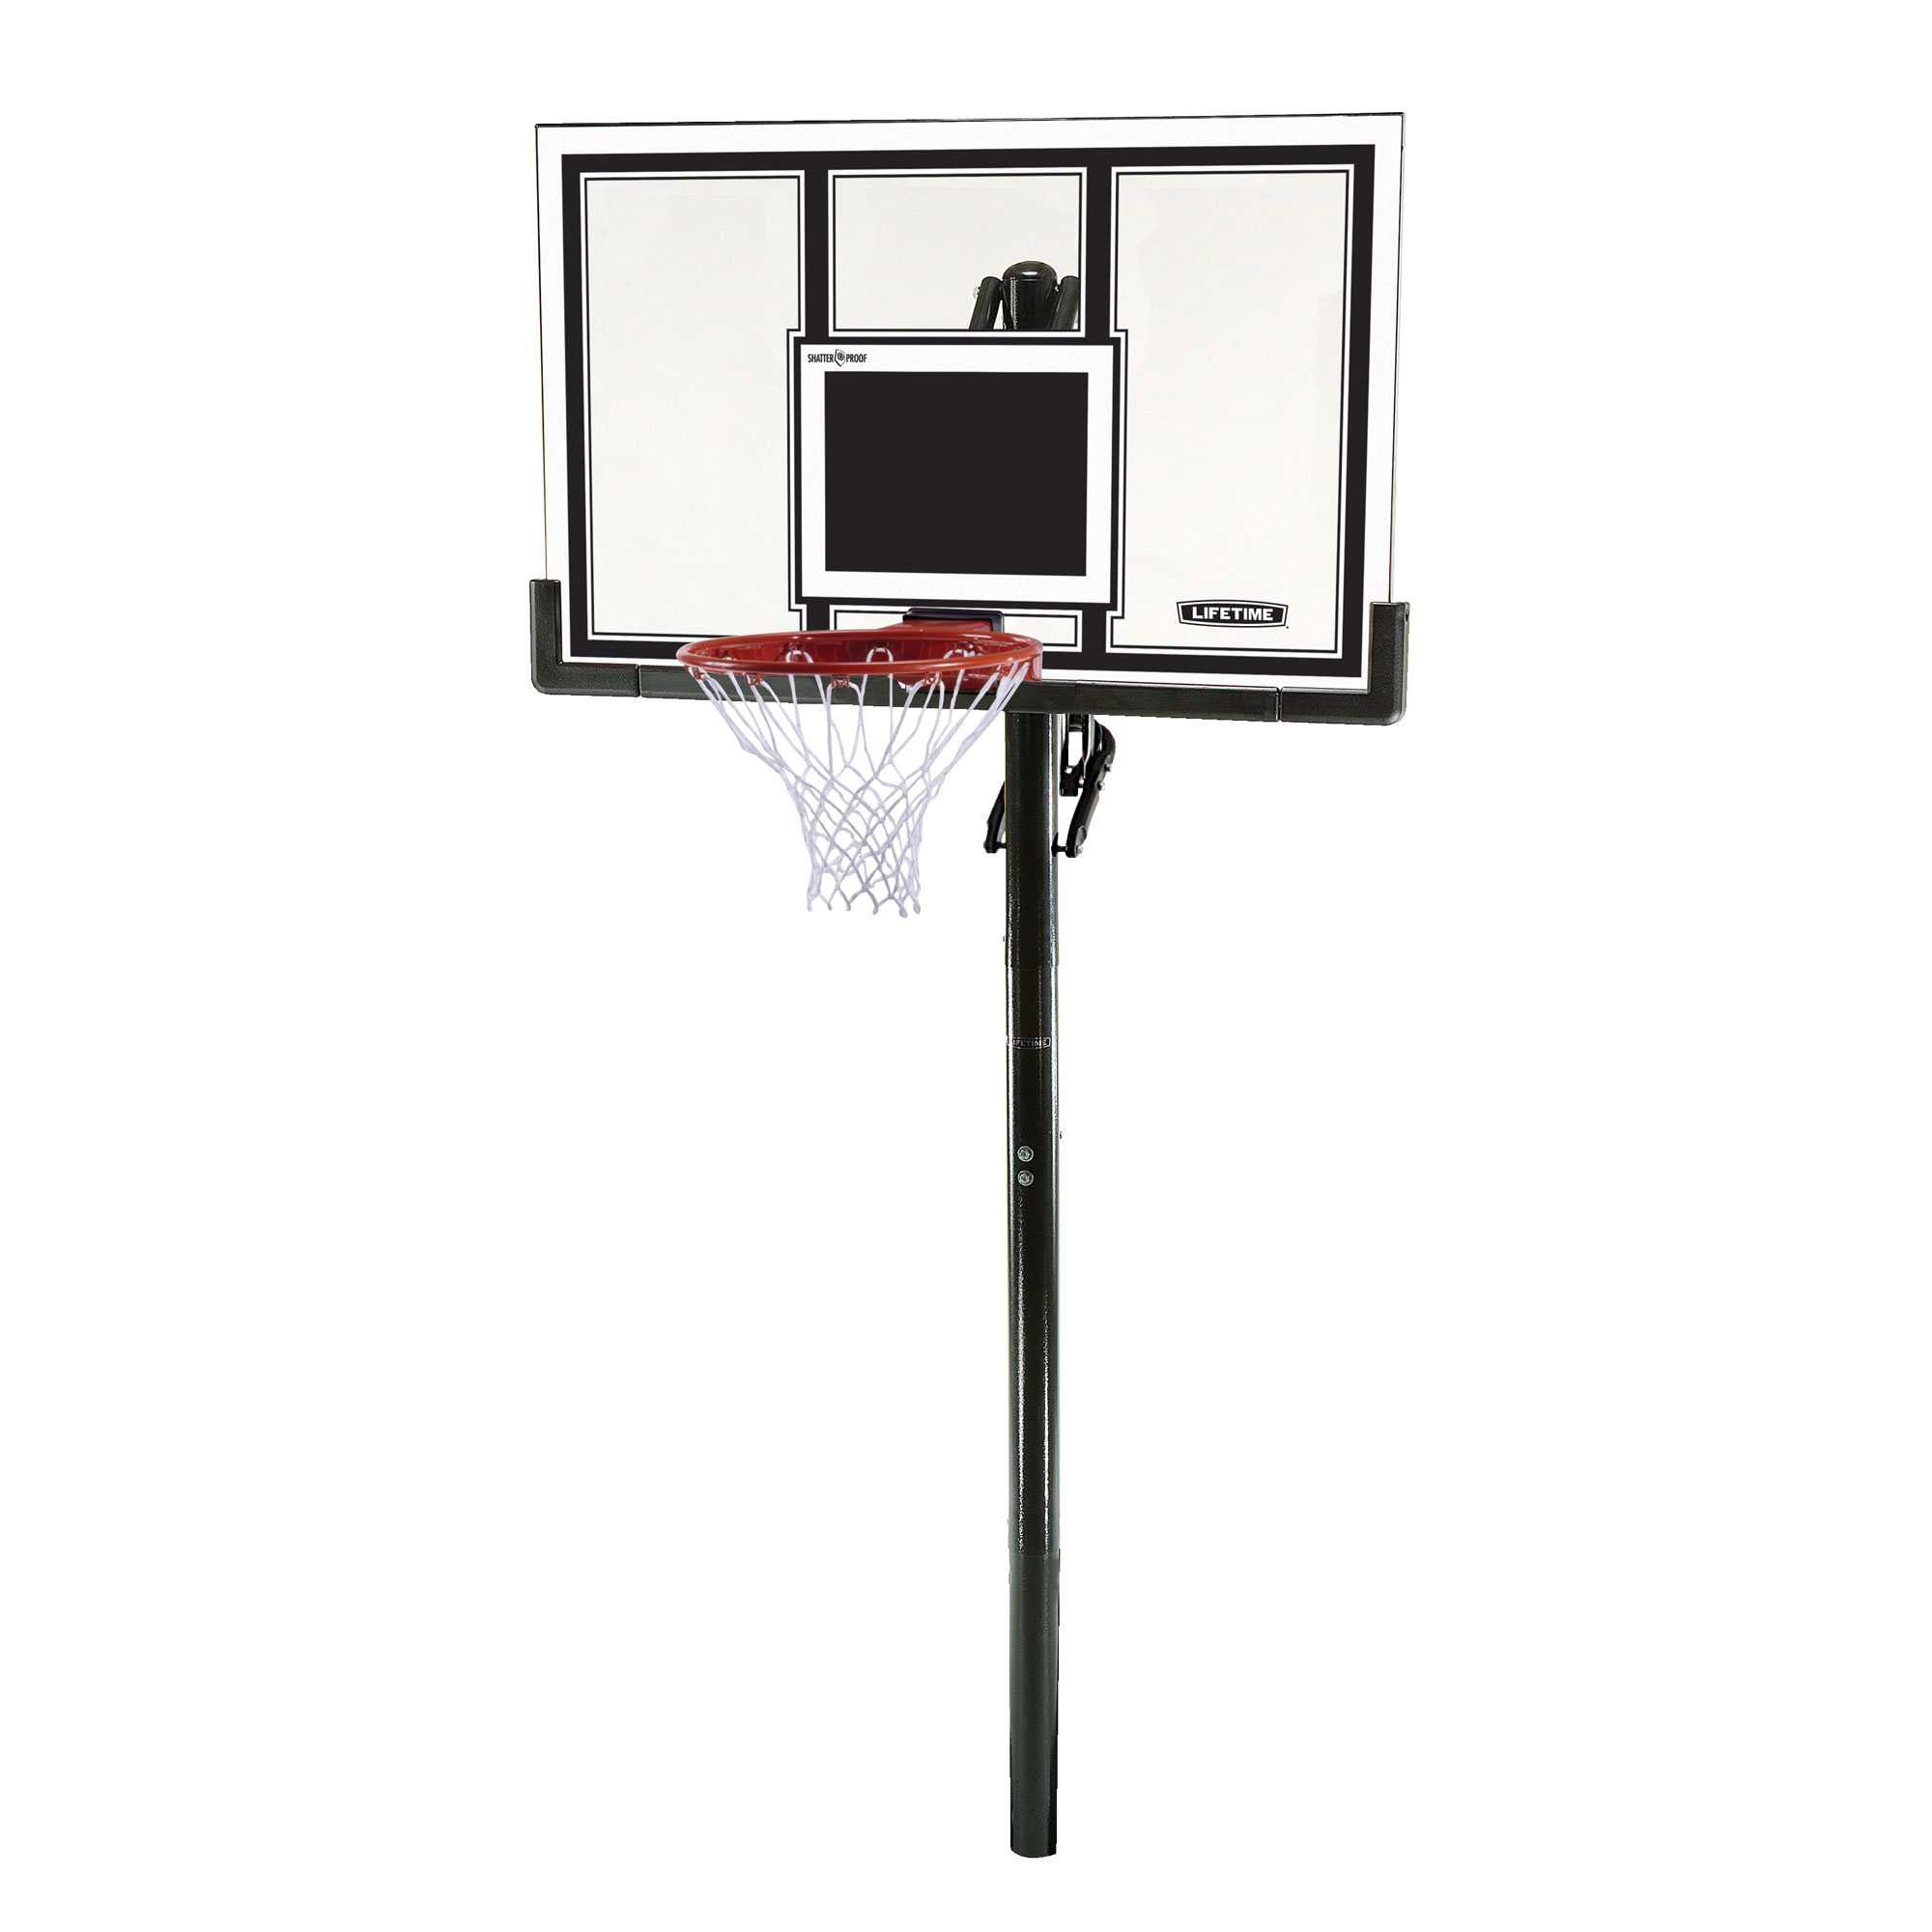 Lifetime Adjustable In-Ground Basketball Hoop System Outdoor Sports Game 52 Inch 